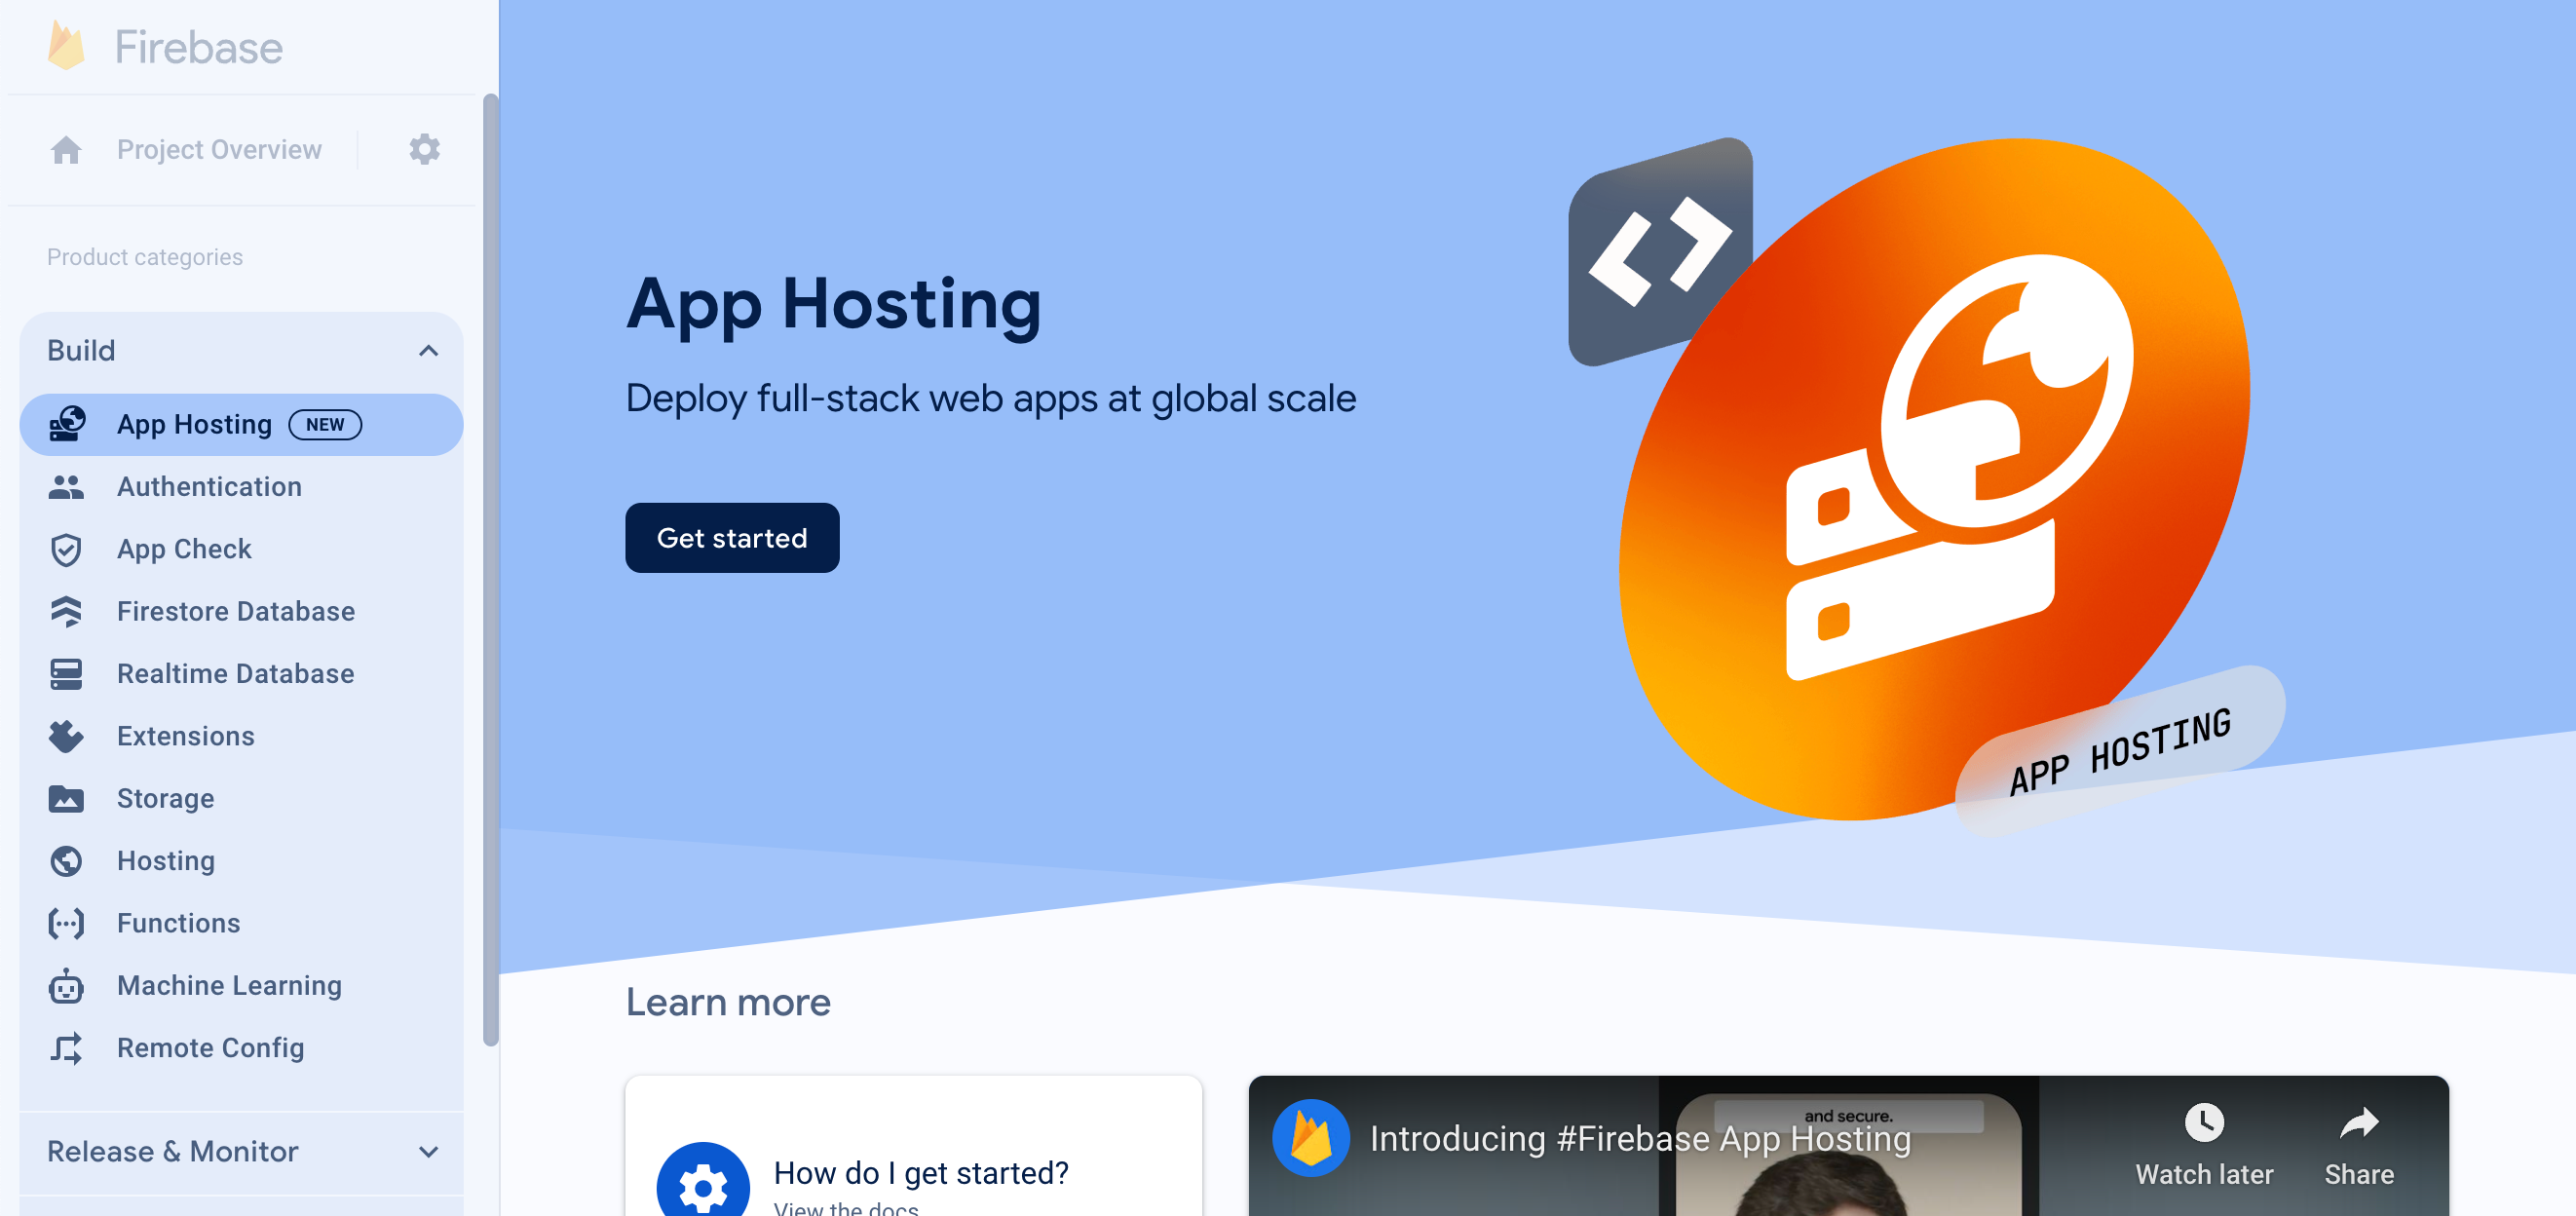 The zero state of the App Hosting console, with a 'Get Started' button